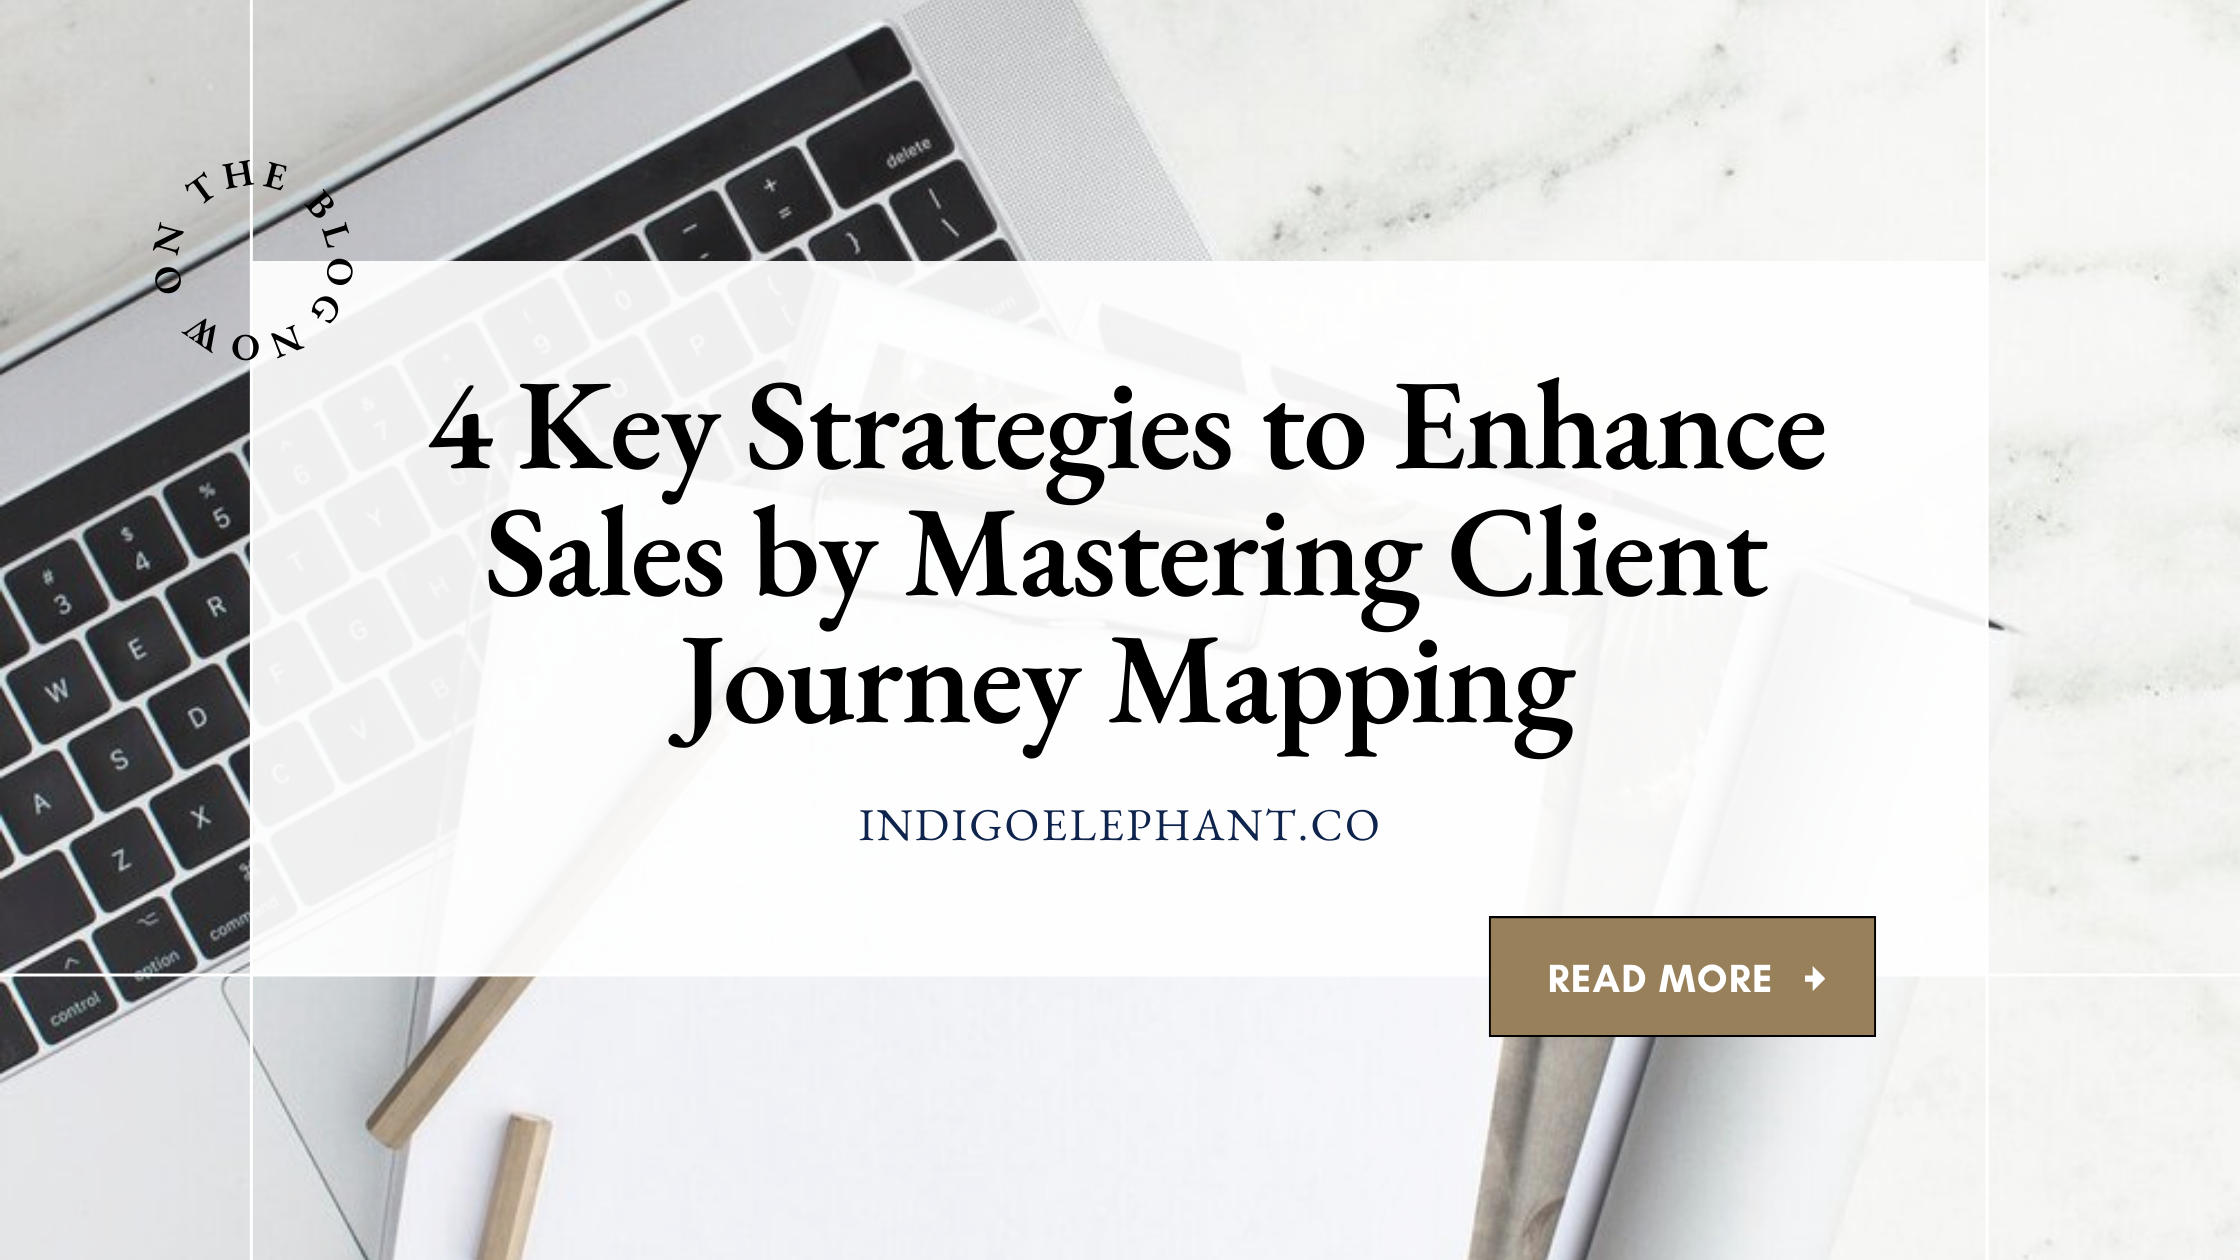 4 Key Strategies to Enhance Sales by Mastering Client Journey Mapping